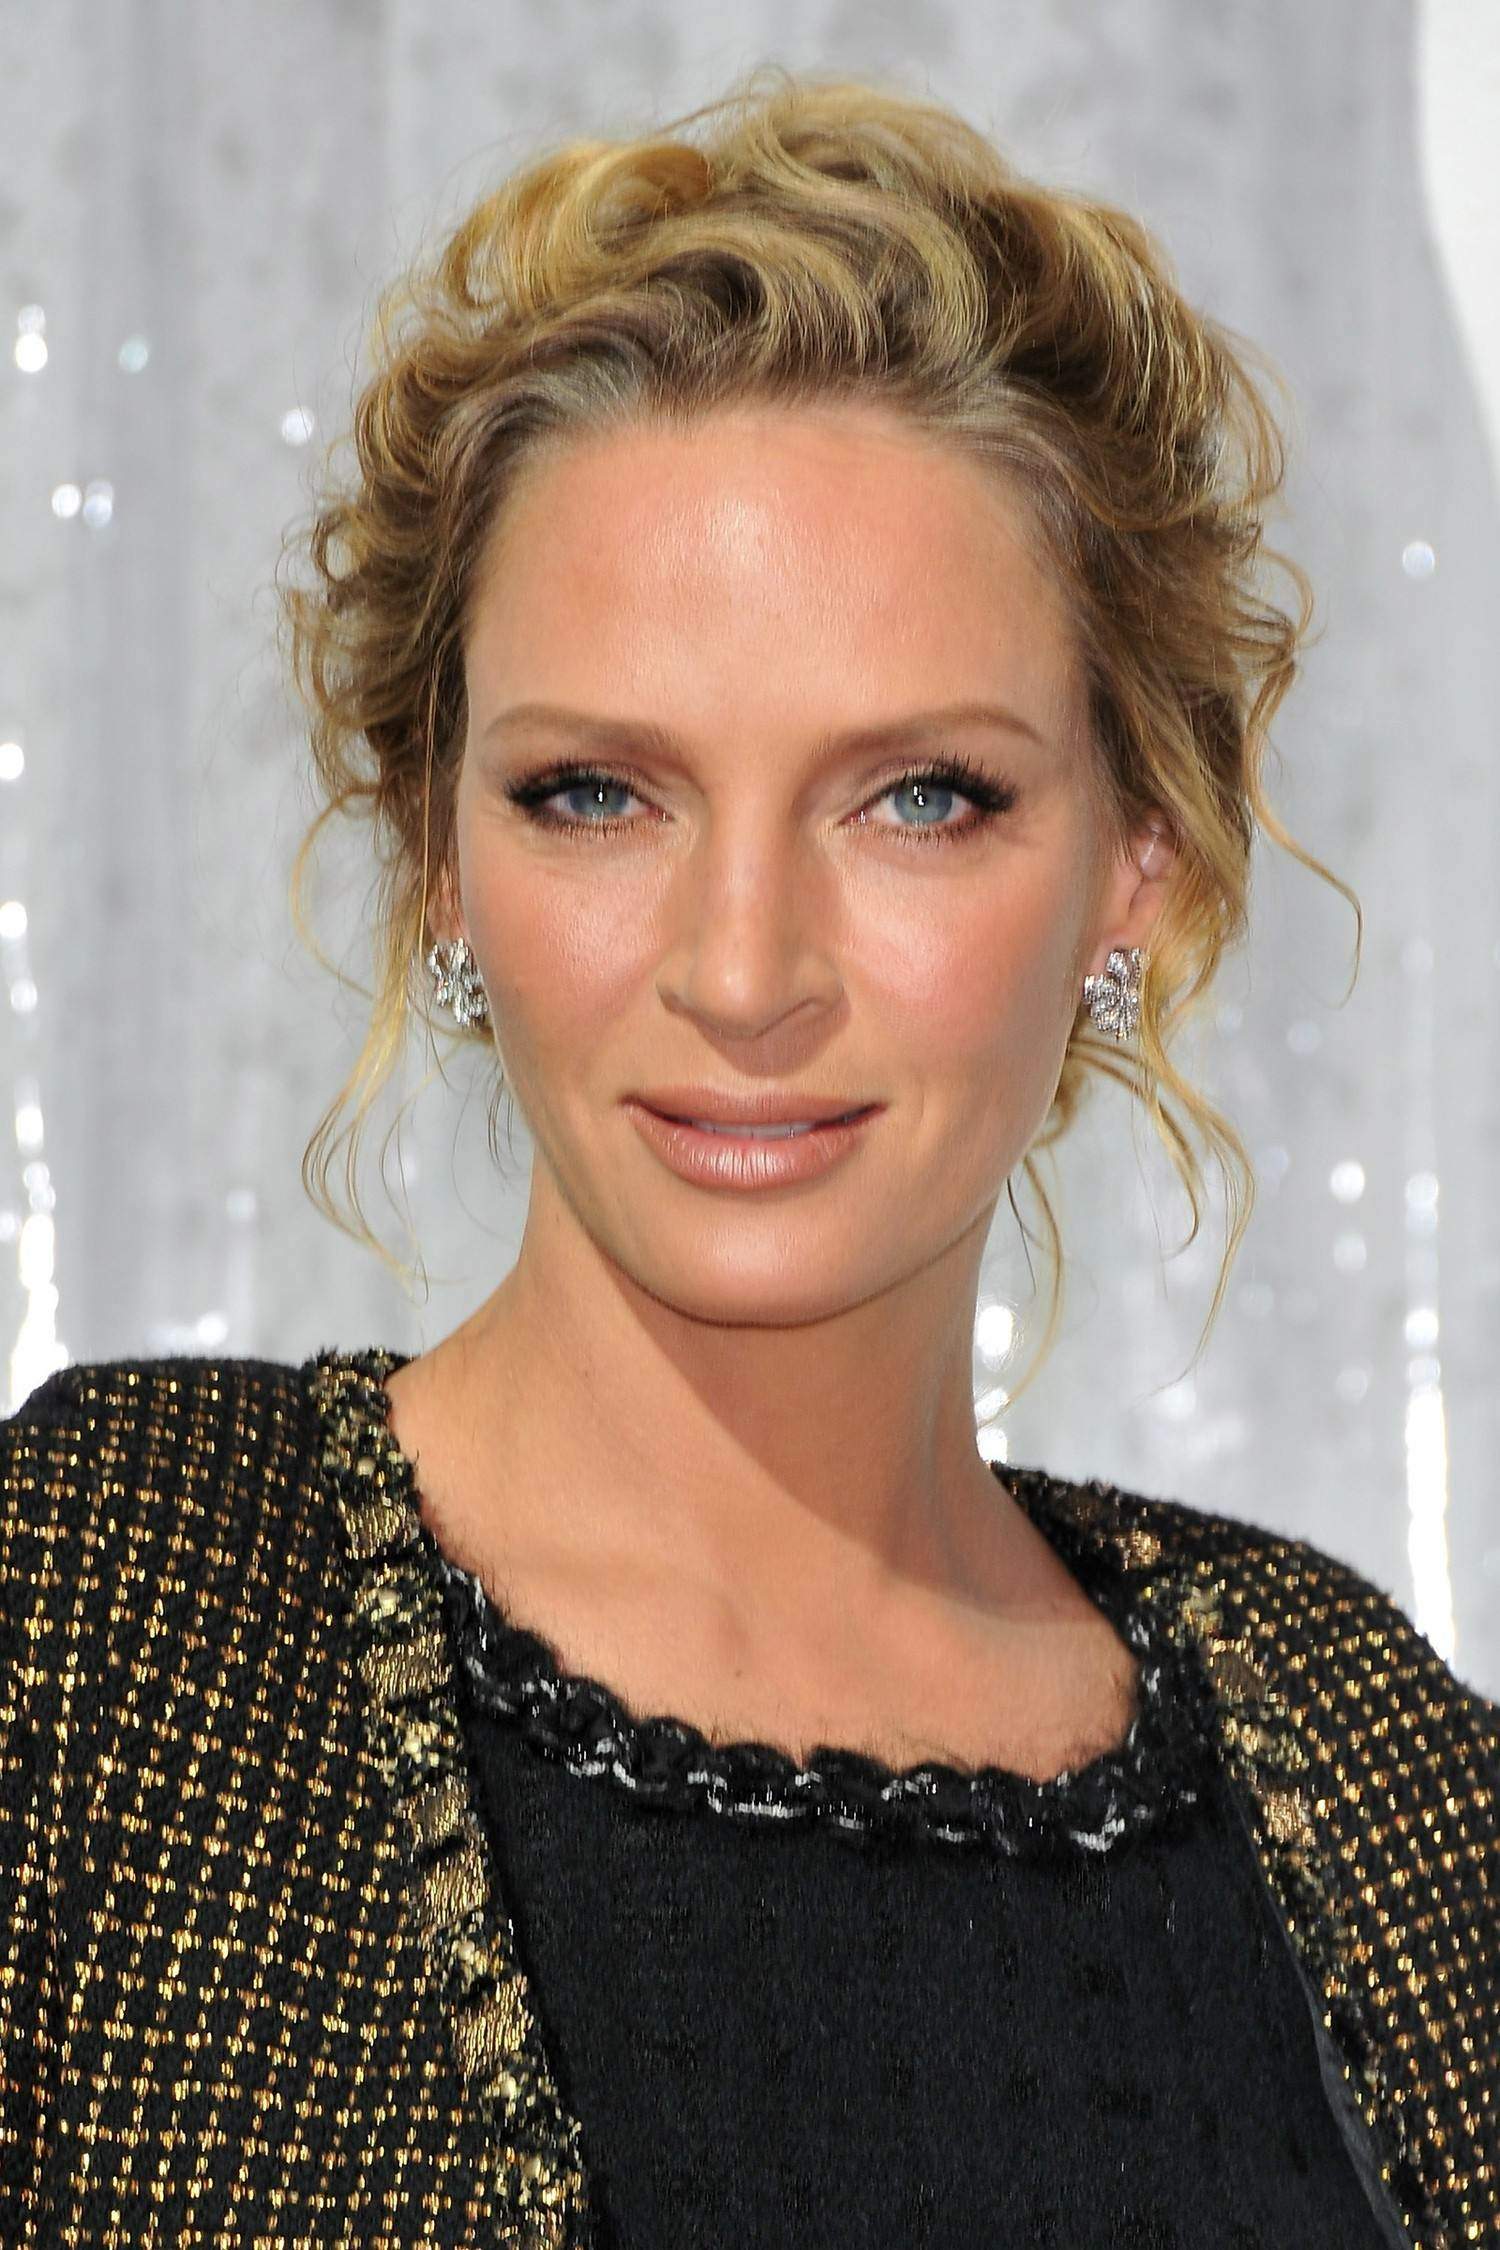 Uma Thurman Chanel\'s spring-summer 2012 ready to wear collection, Paris October 4-20116.jpg